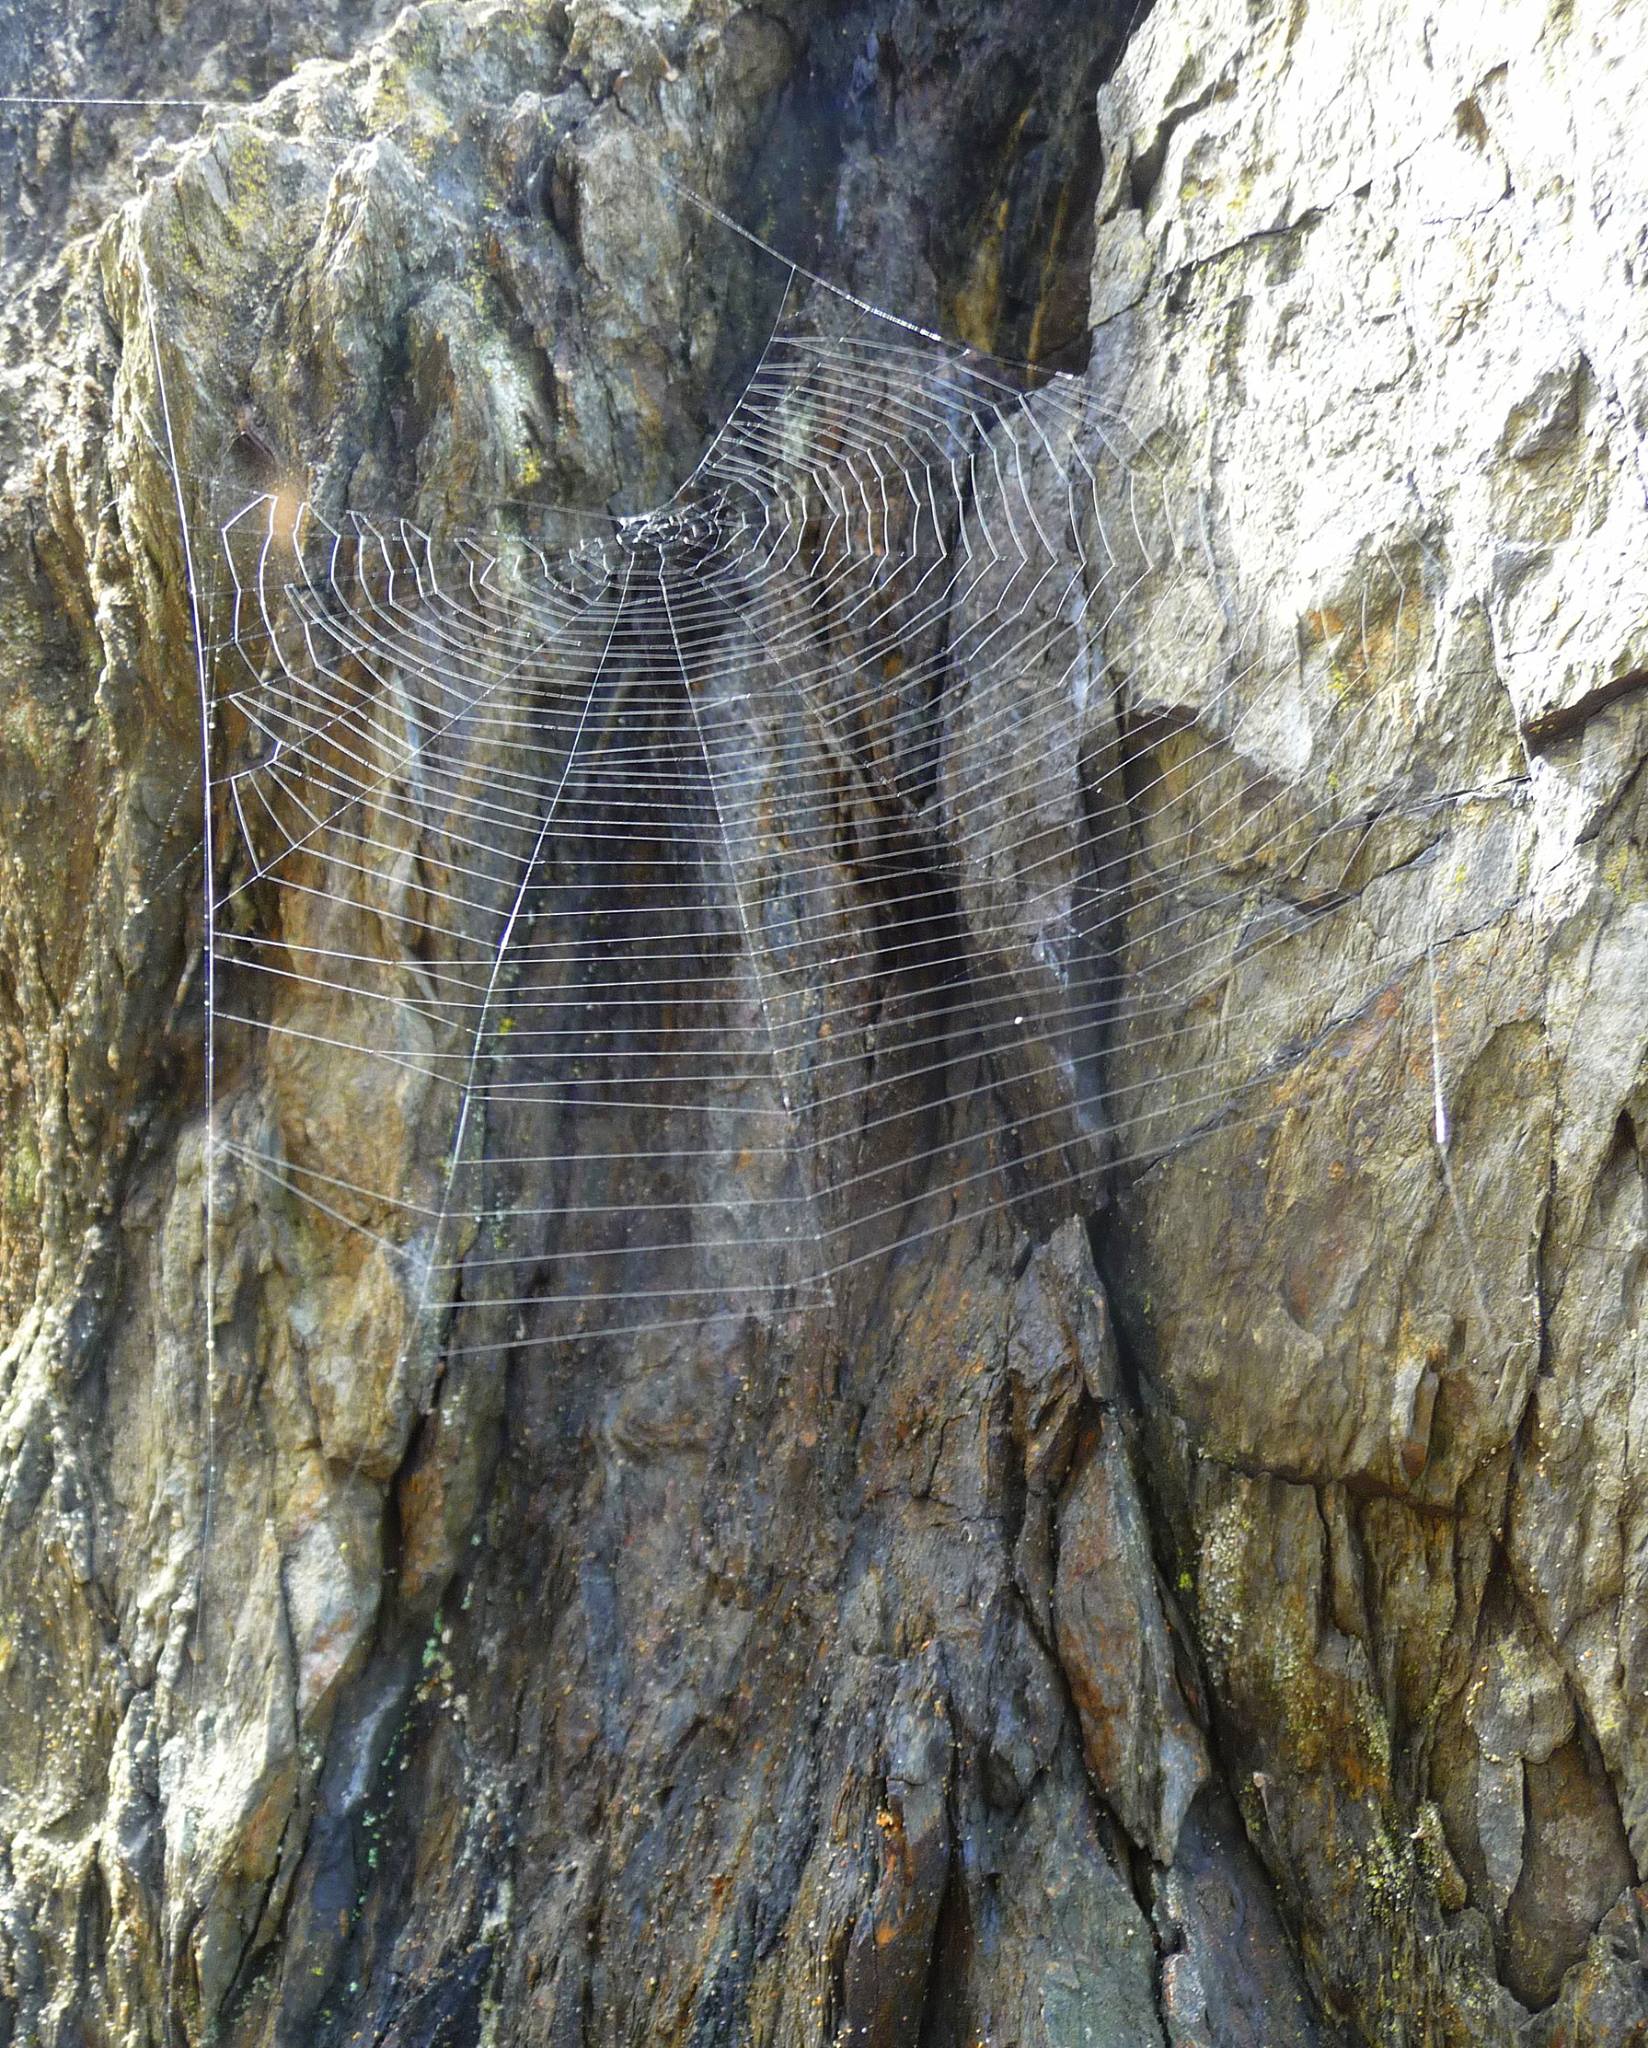 A spider web clinging to a crevice in a rock cliff